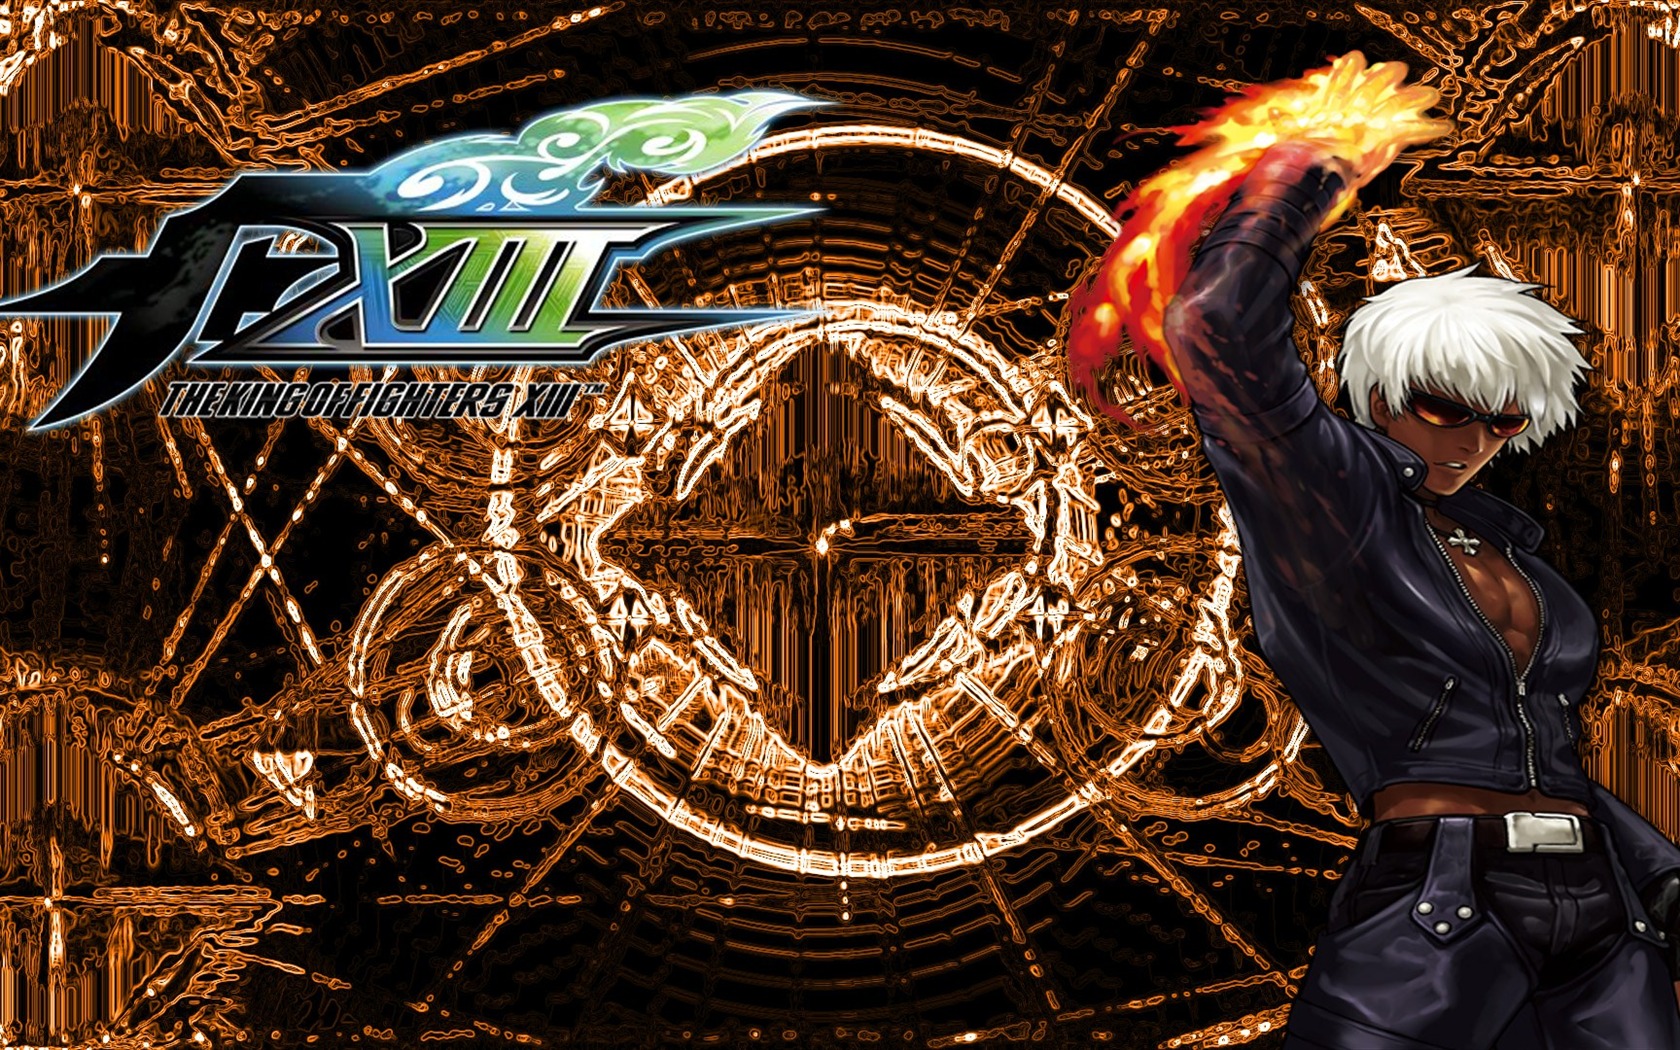 Le roi de wallpapers Fighters XIII #8 - 1680x1050